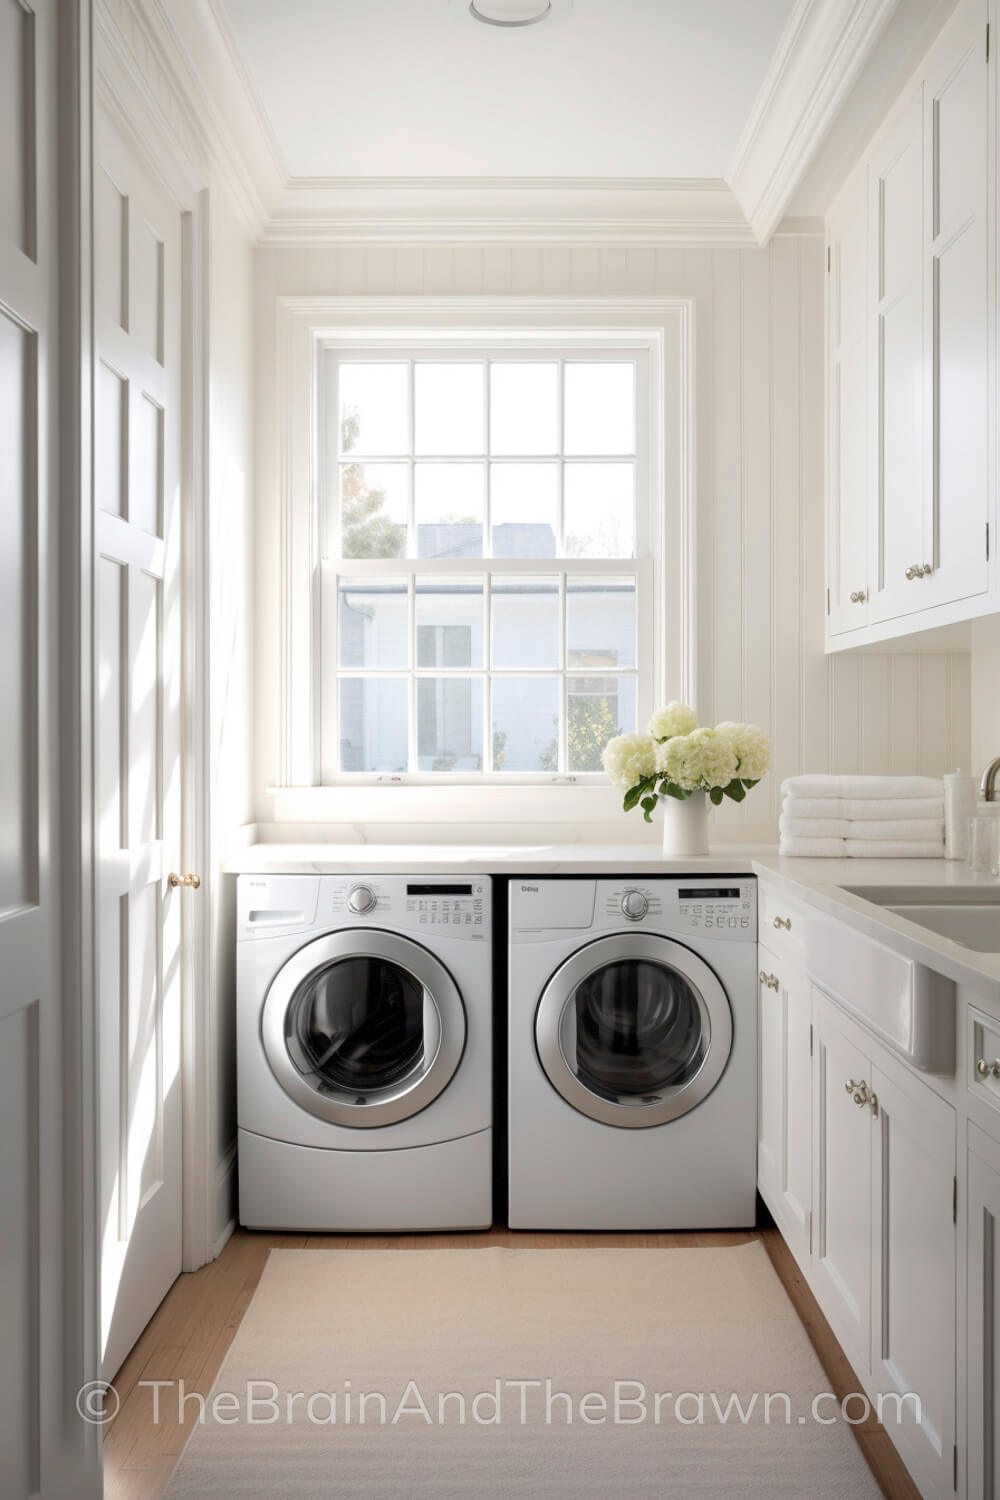 White laundry room with vertical bead board on the walls. Washer and dryer sit below the window. A neutral laundry room rug lays on the floor